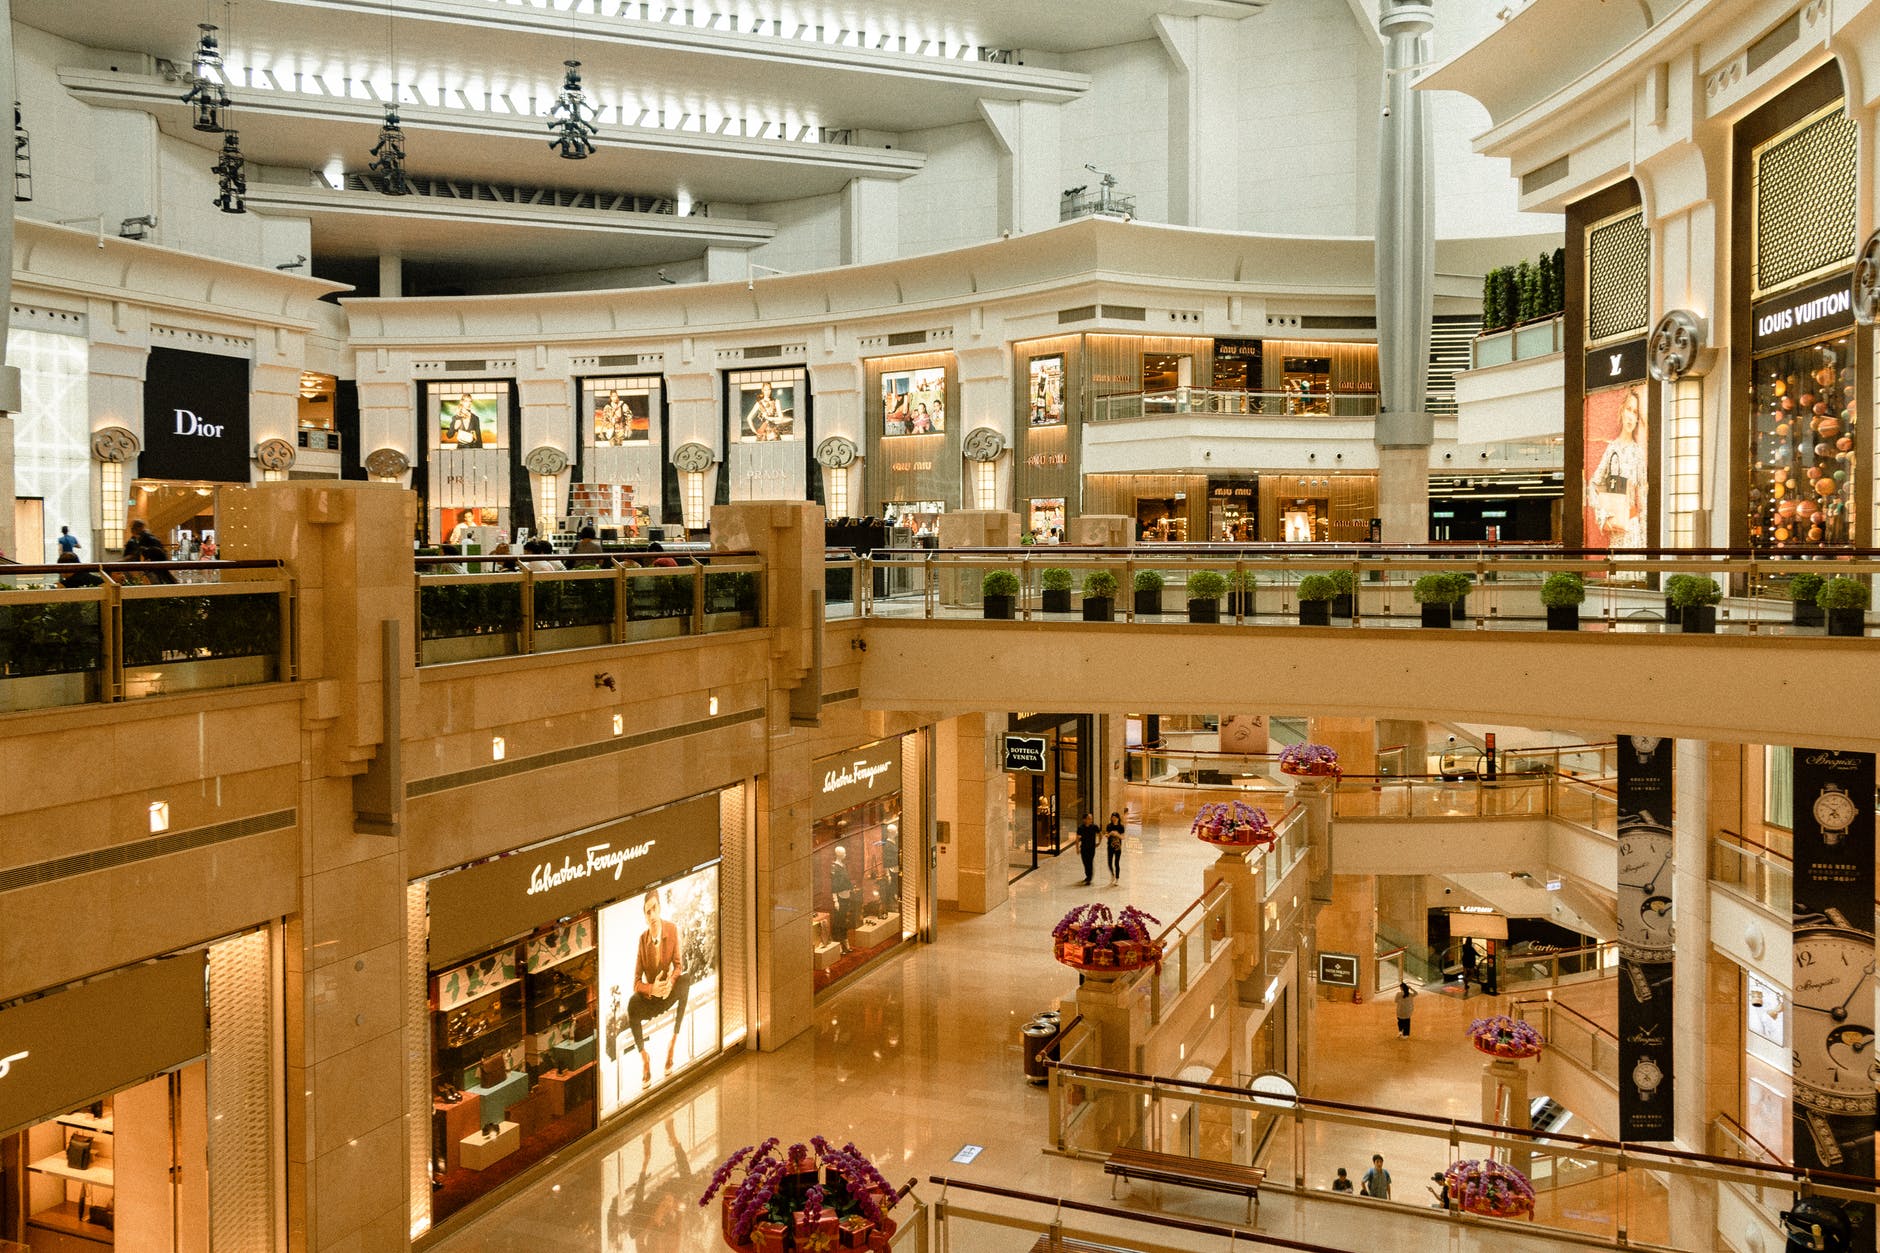 modern style shopping center with shiny floor and many boutiques